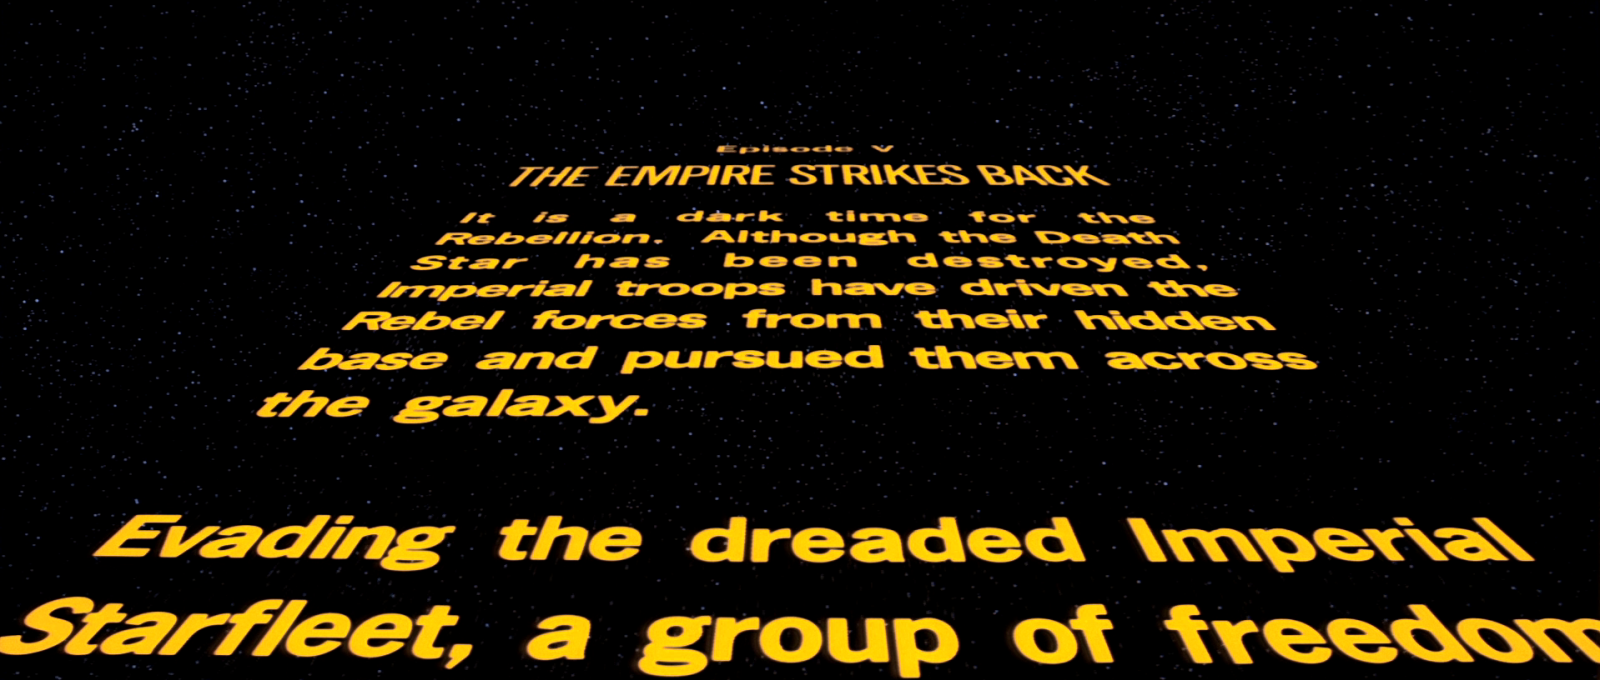 Font Used In Star Wars Crawl